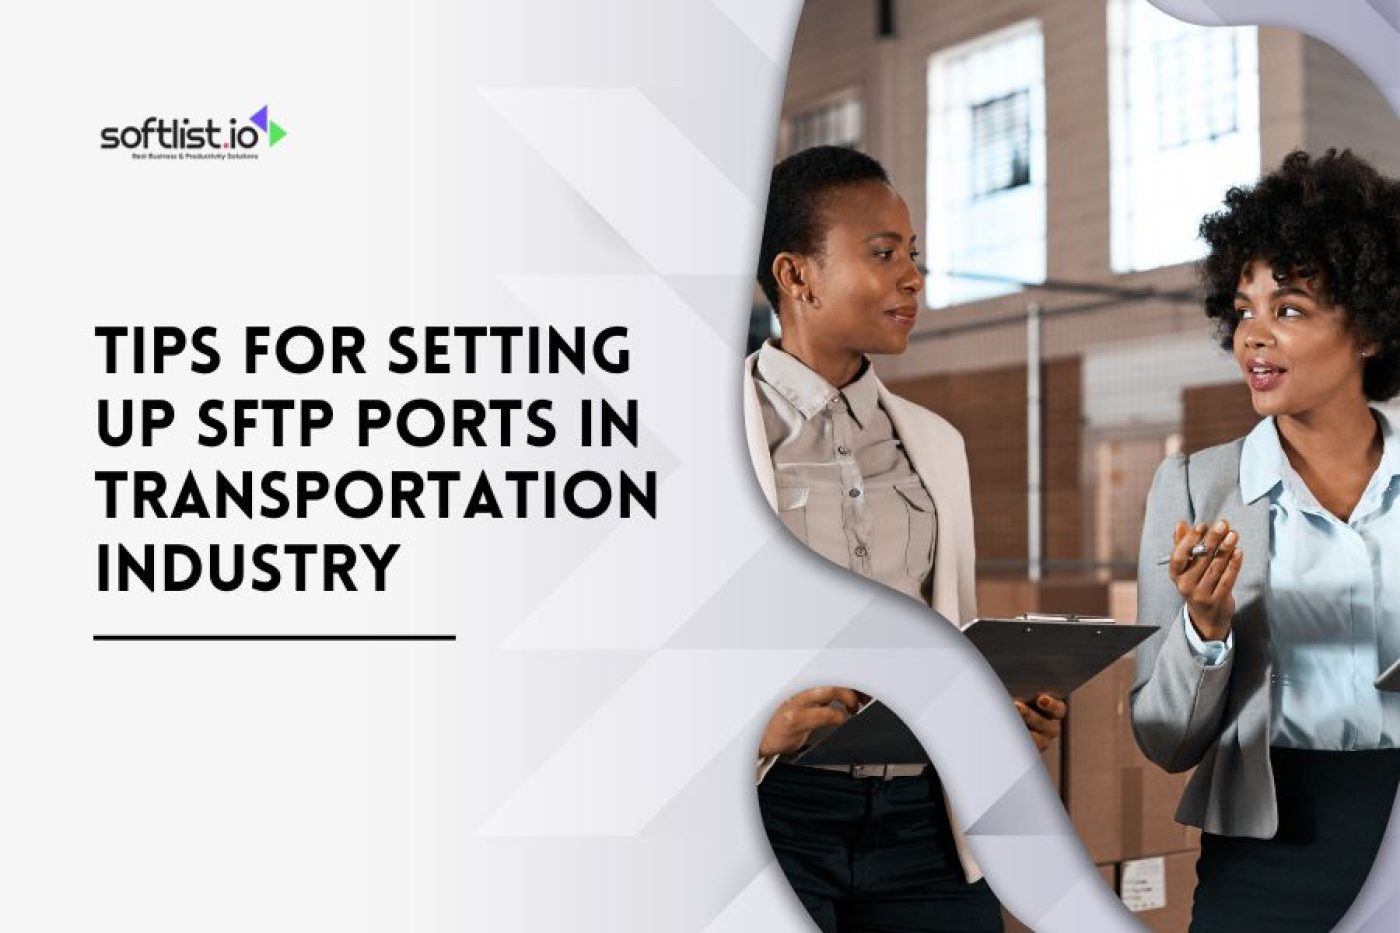 Tips for Setting Up SFTP Ports in the Transportation Industry